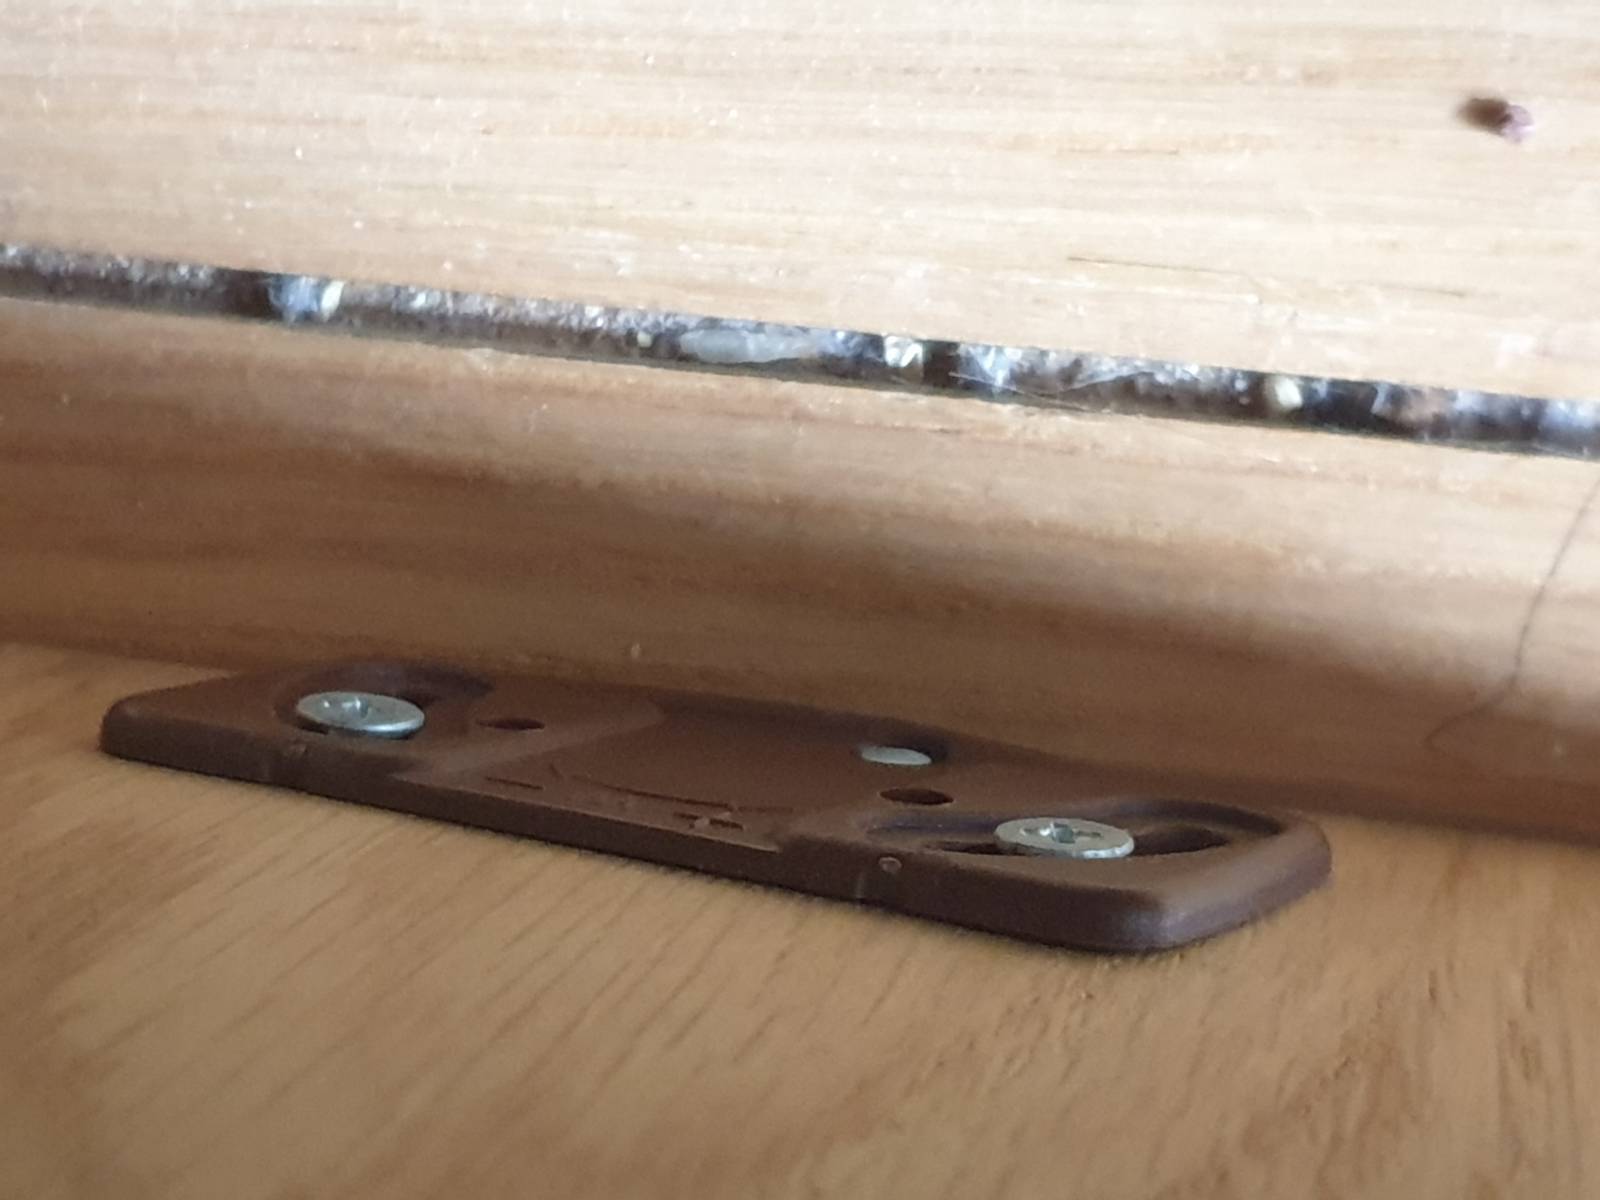 What is this joinery hardware product?